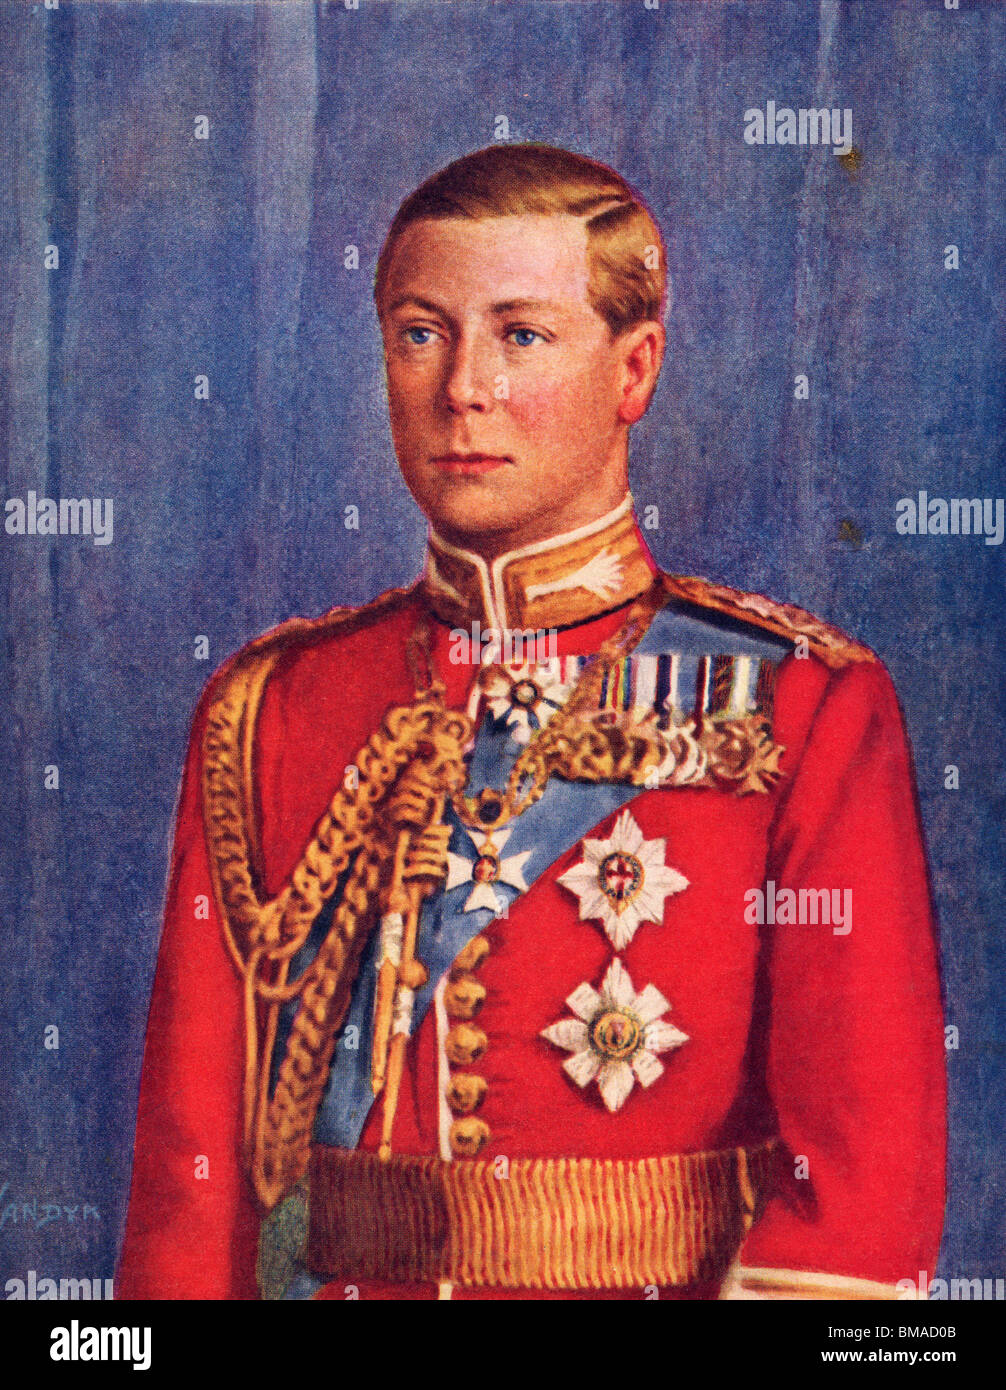 Edward VIII, 1894 to 1972. King of the United Kingdom and Emperor of India. Stock Photo